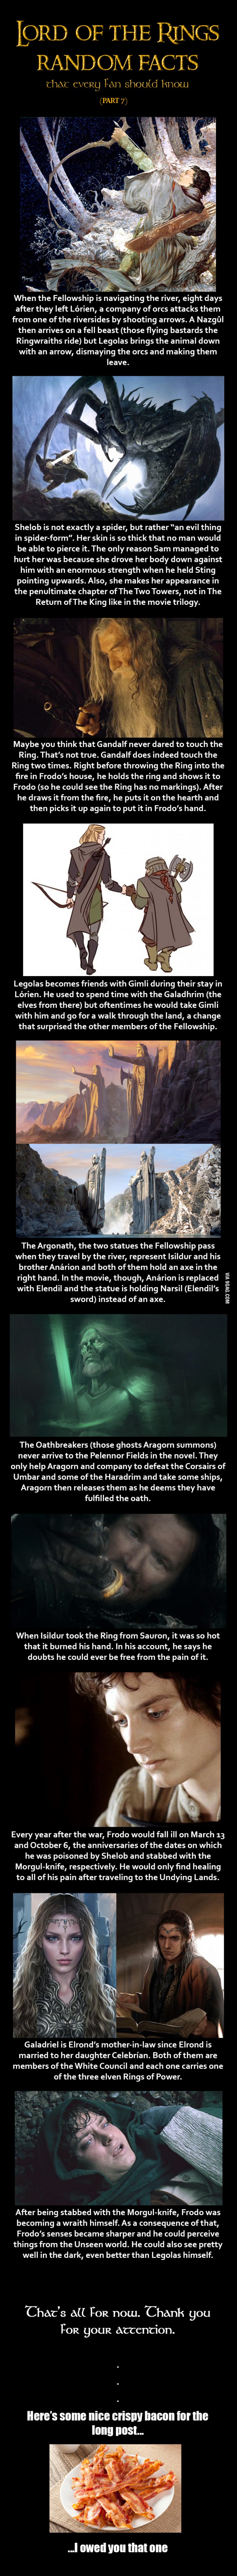 Lord of the Rings Random Facts Part 7